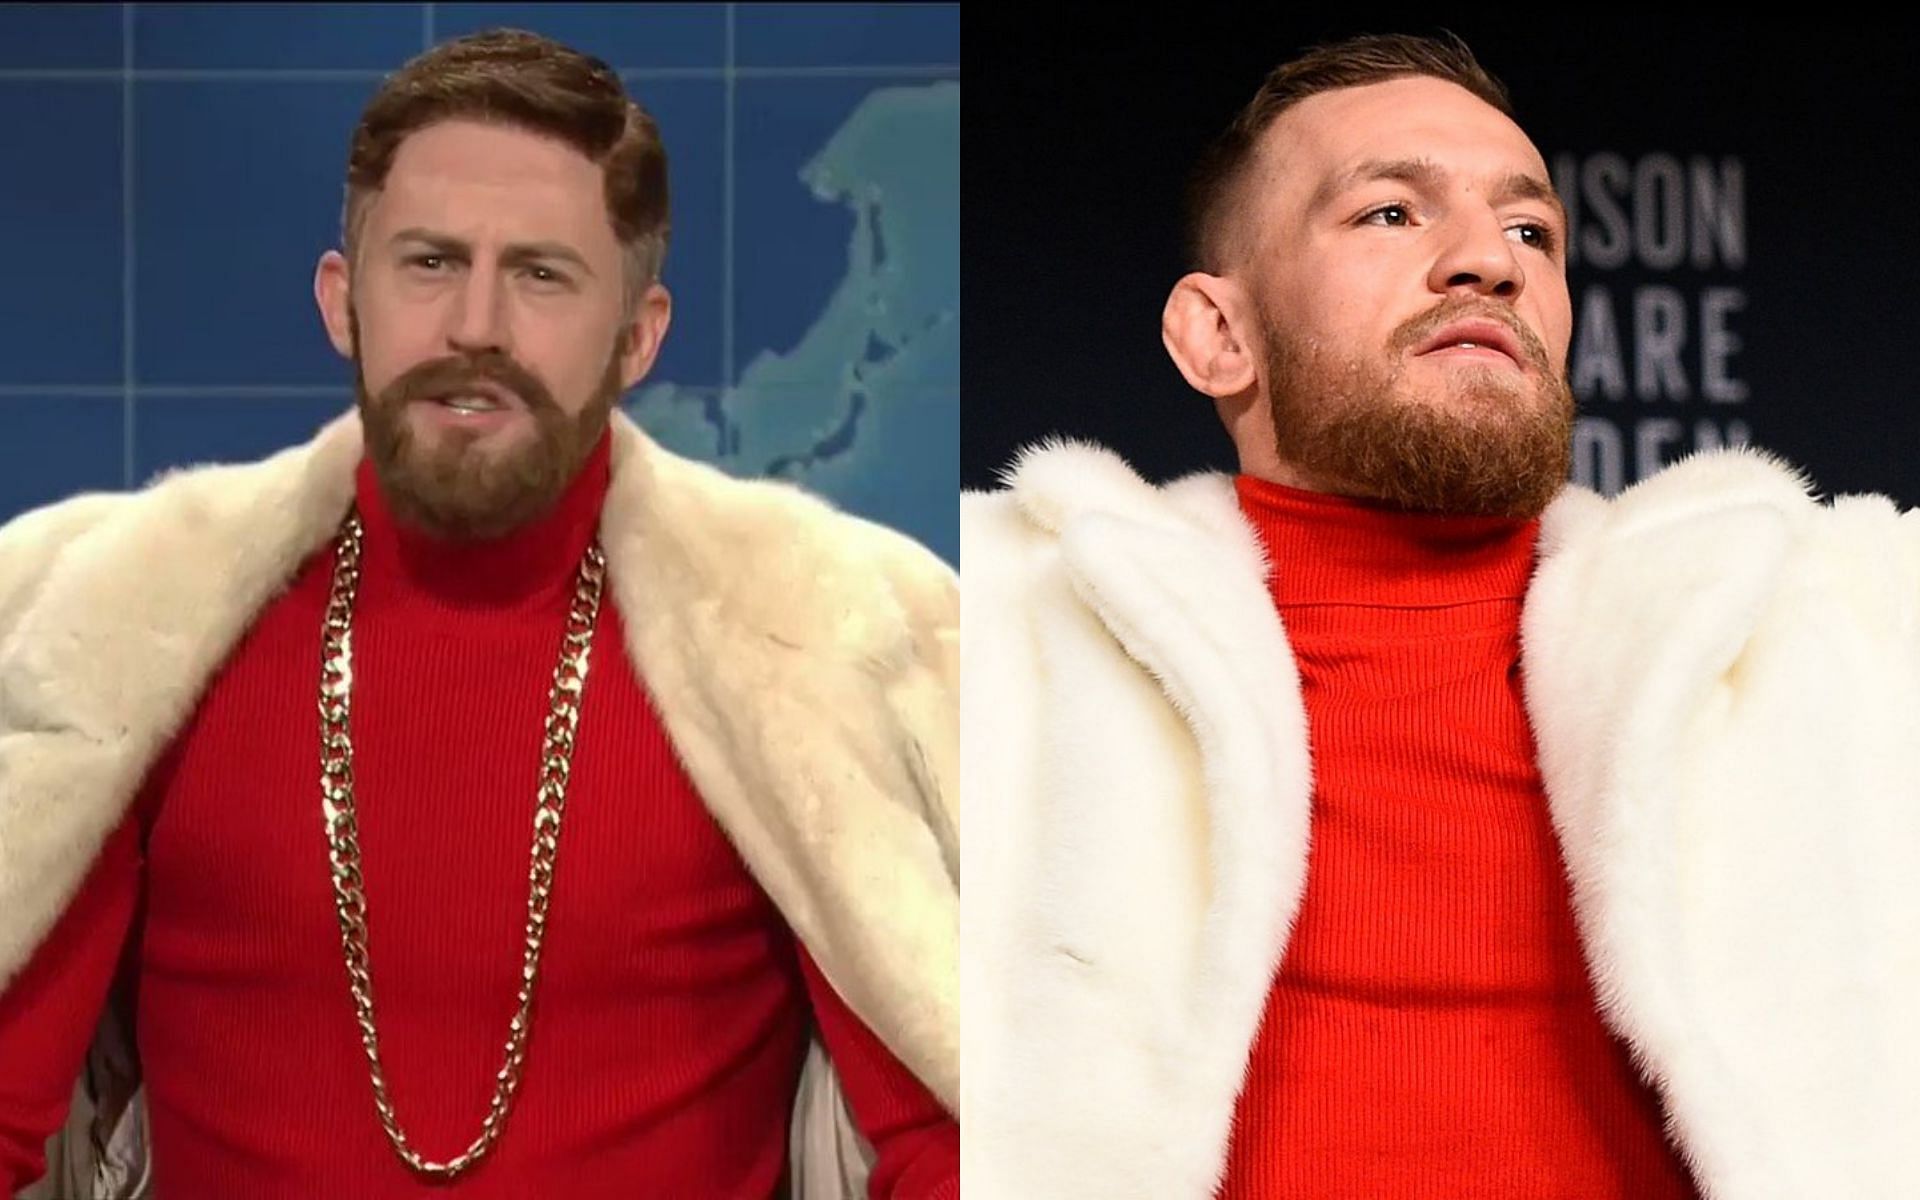 Conor McGregor was mimicked at the Saturday Night Live show before his mega-fight with Floyd Mayweather [Credits: @nbcsnl via Twitter]